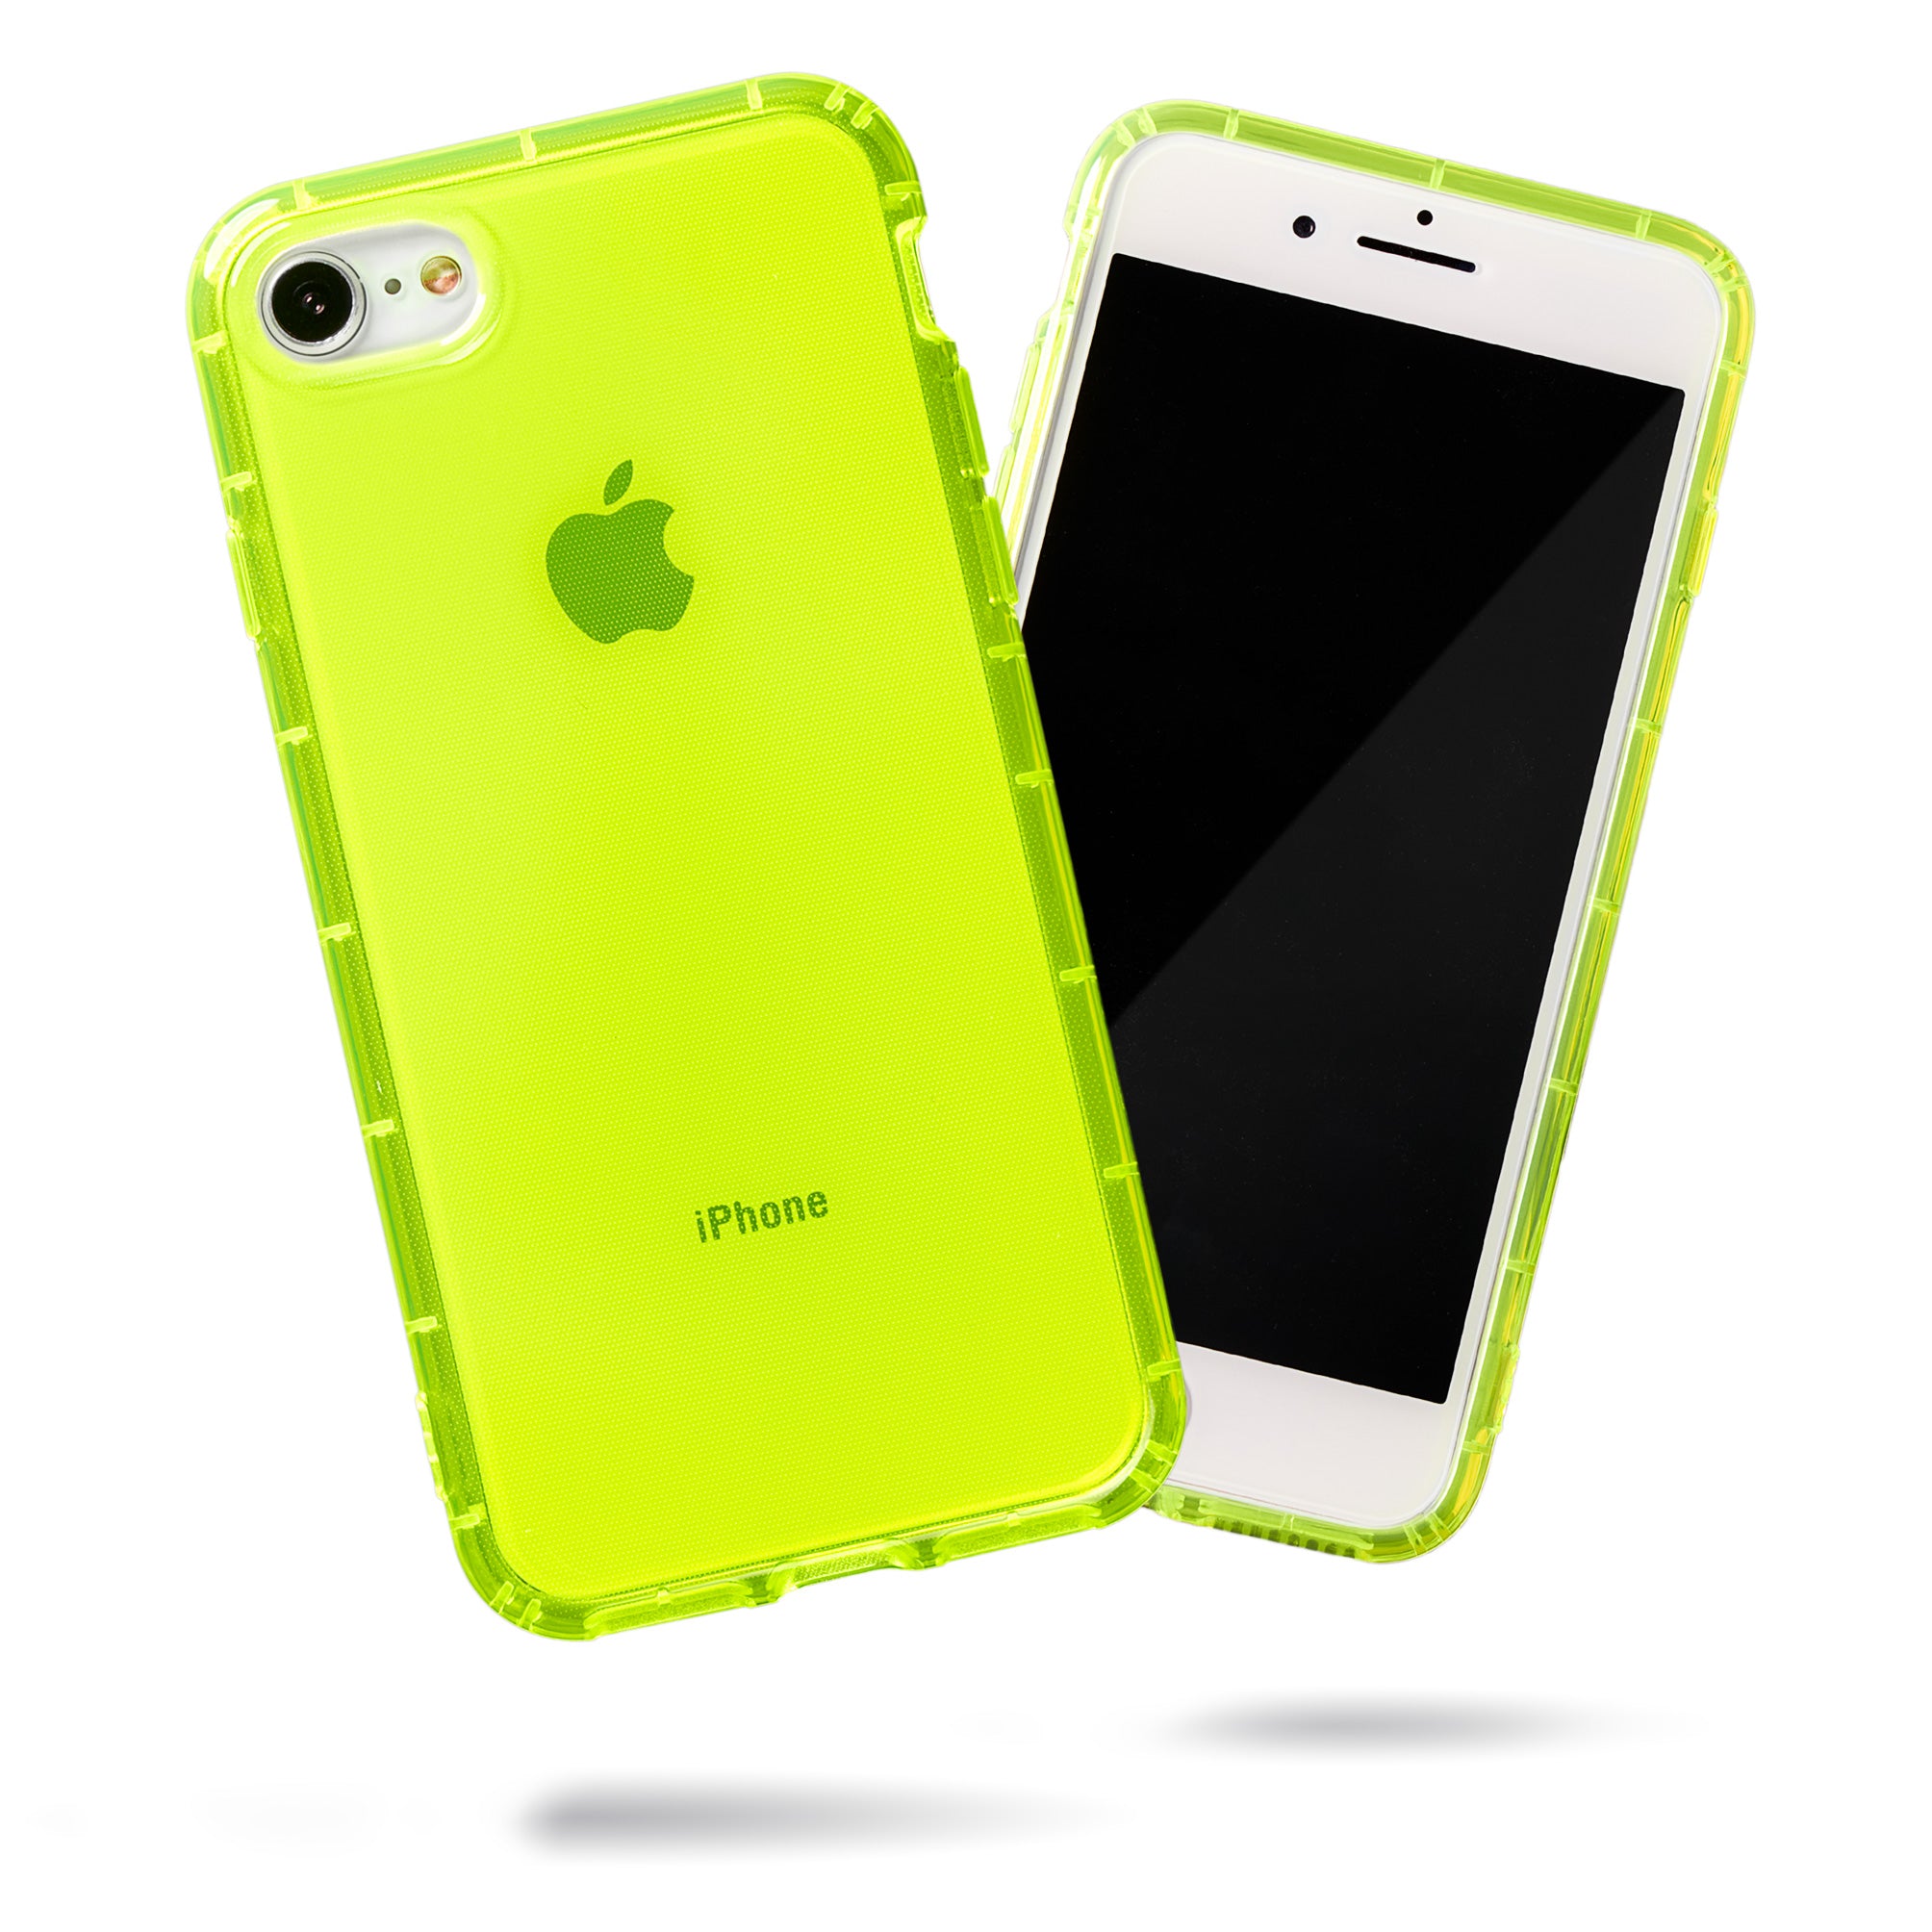 Highlighter Case for iPhone SE, iPhone 8 & iPhone 7 - Conspicuous Neon Yellow